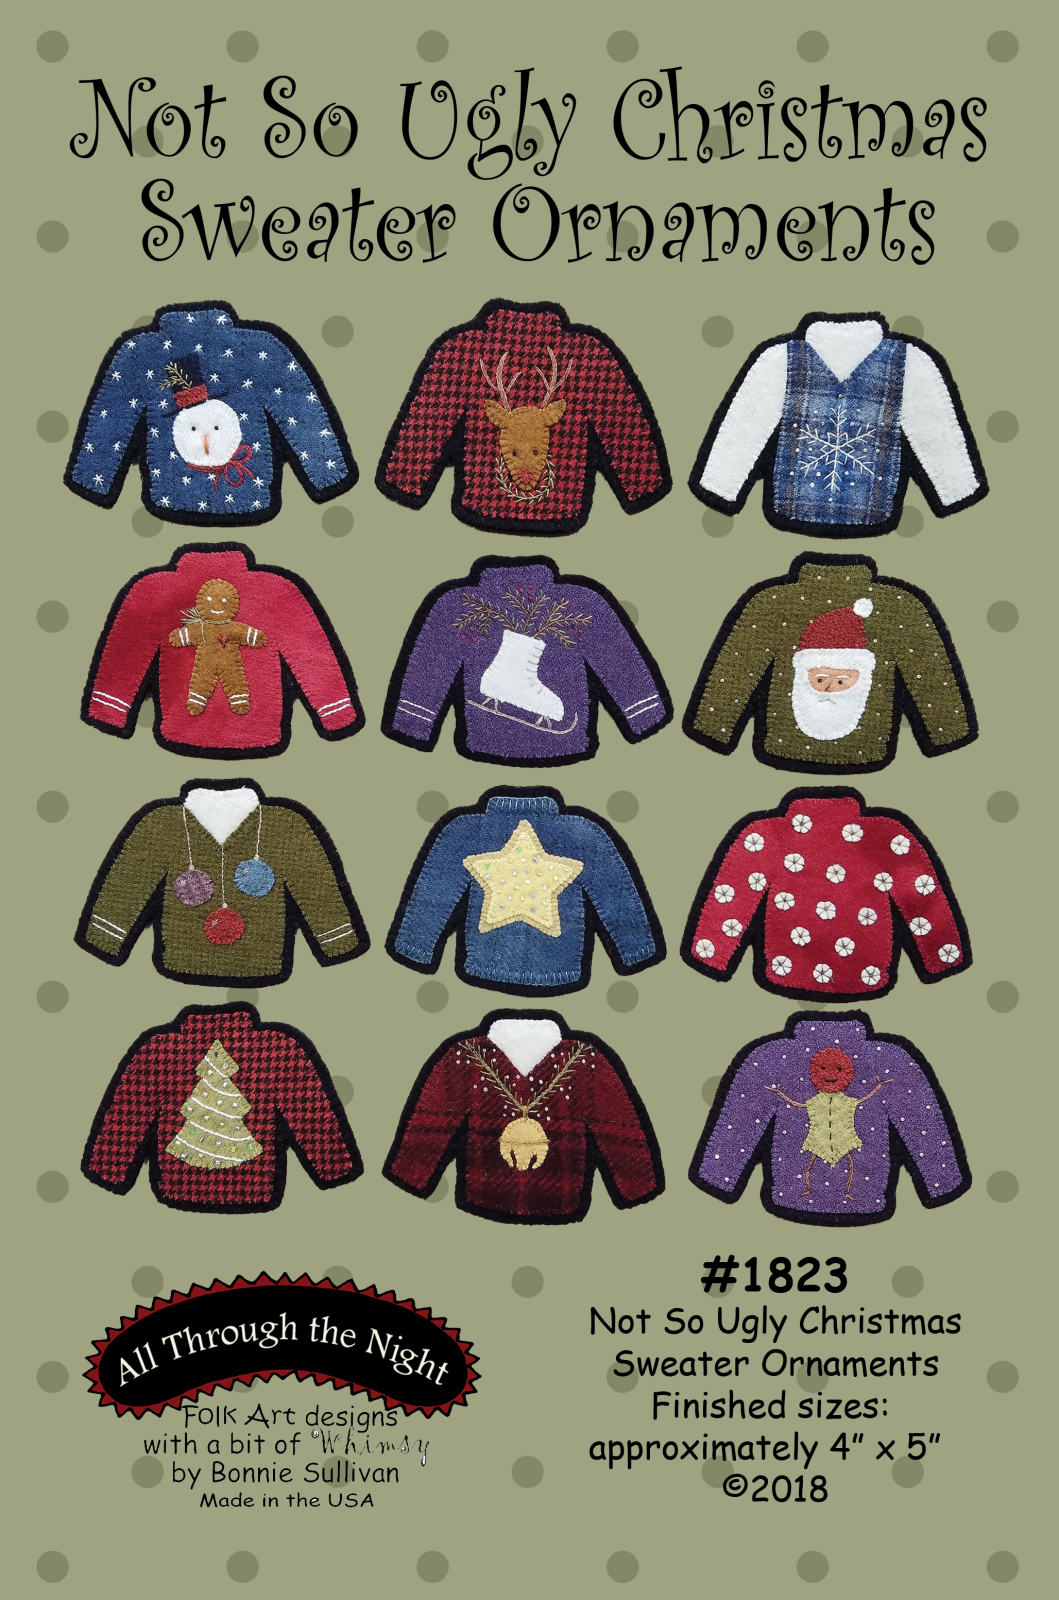 1823 - Not So Ugly Christmas Sweater Ornaments